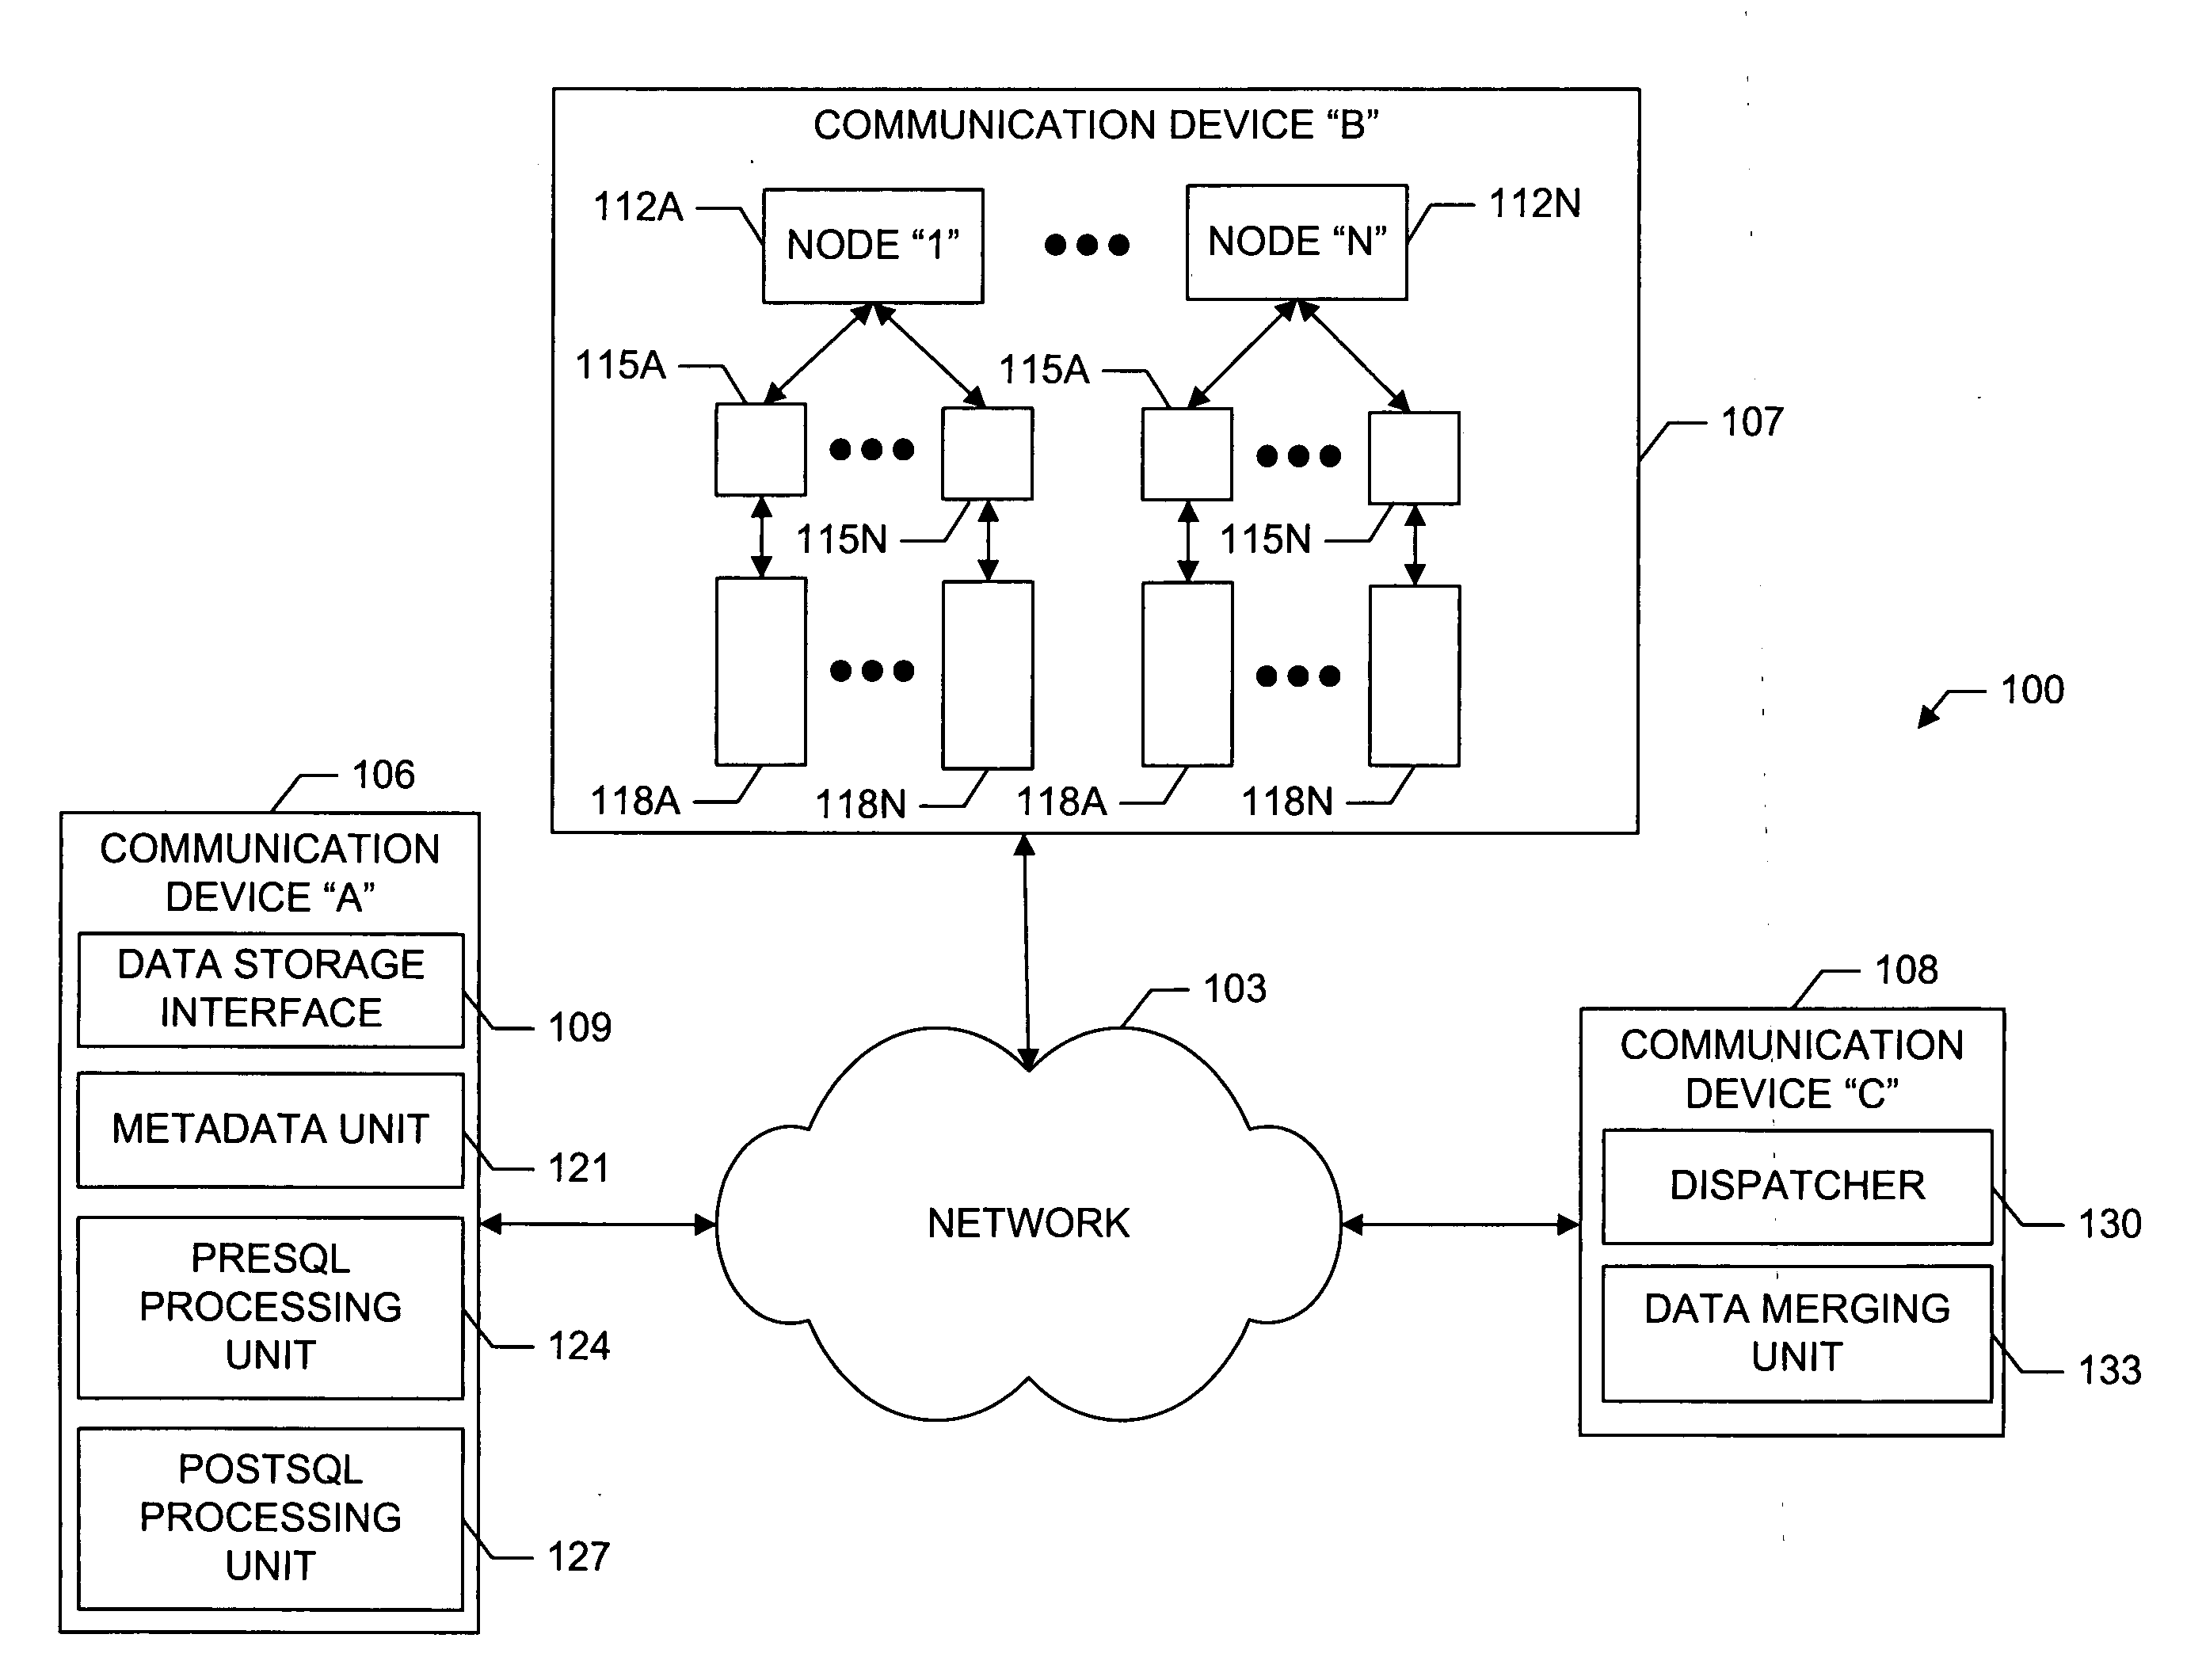 System and methods for facilitating a linear grid database with data organization by dimension